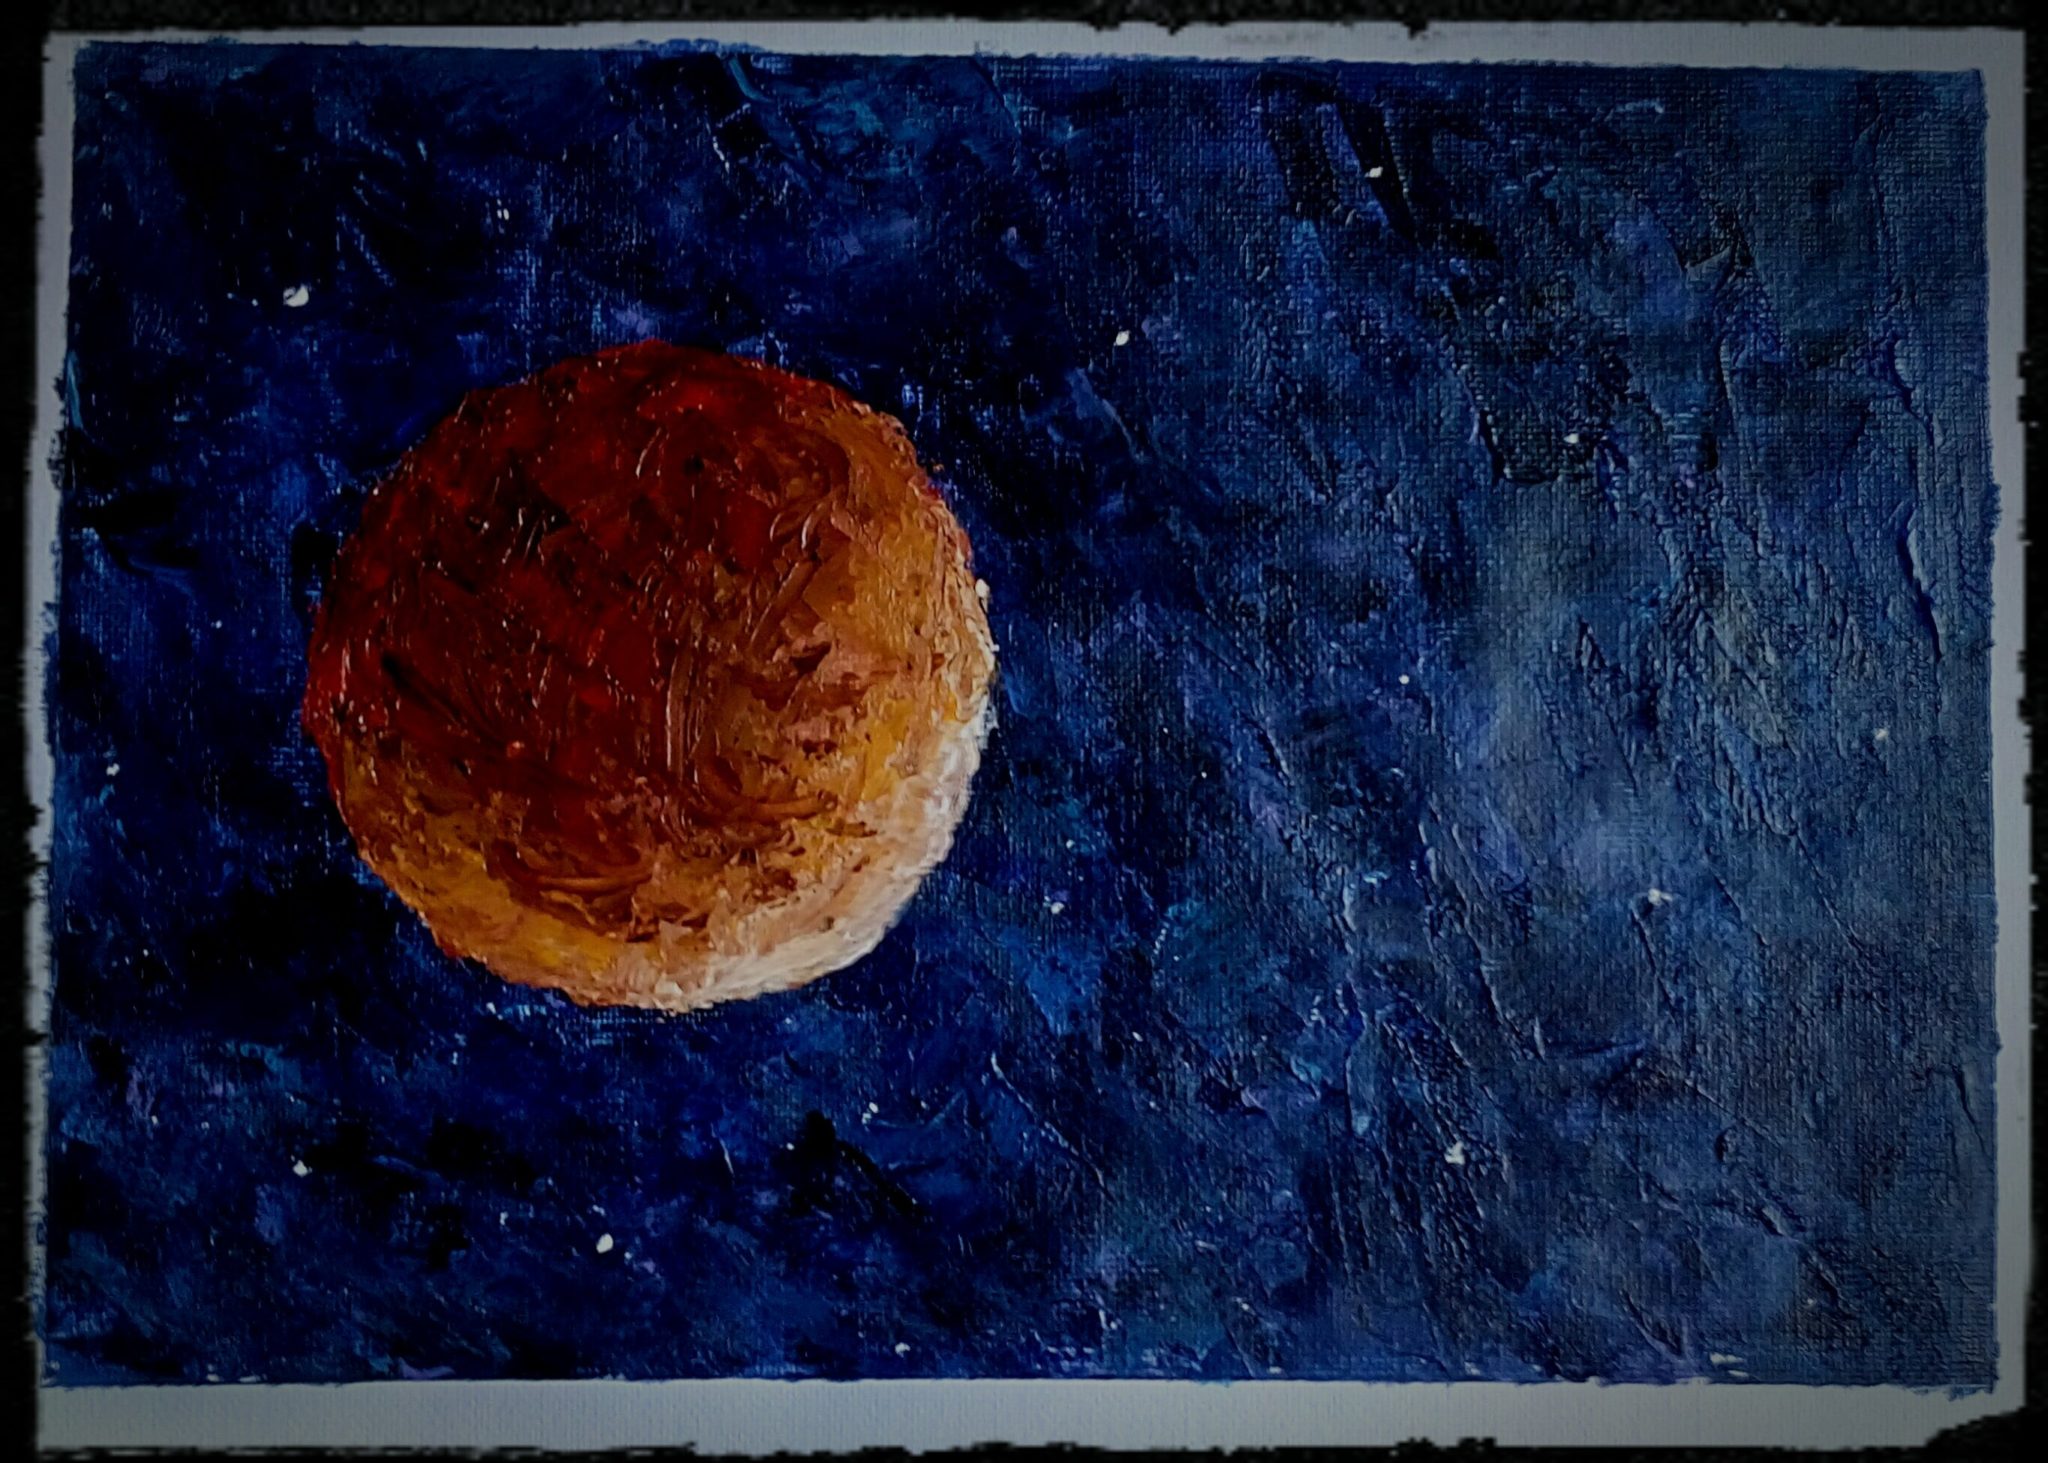 Blood moon inspired by recent Lunar Eclipse